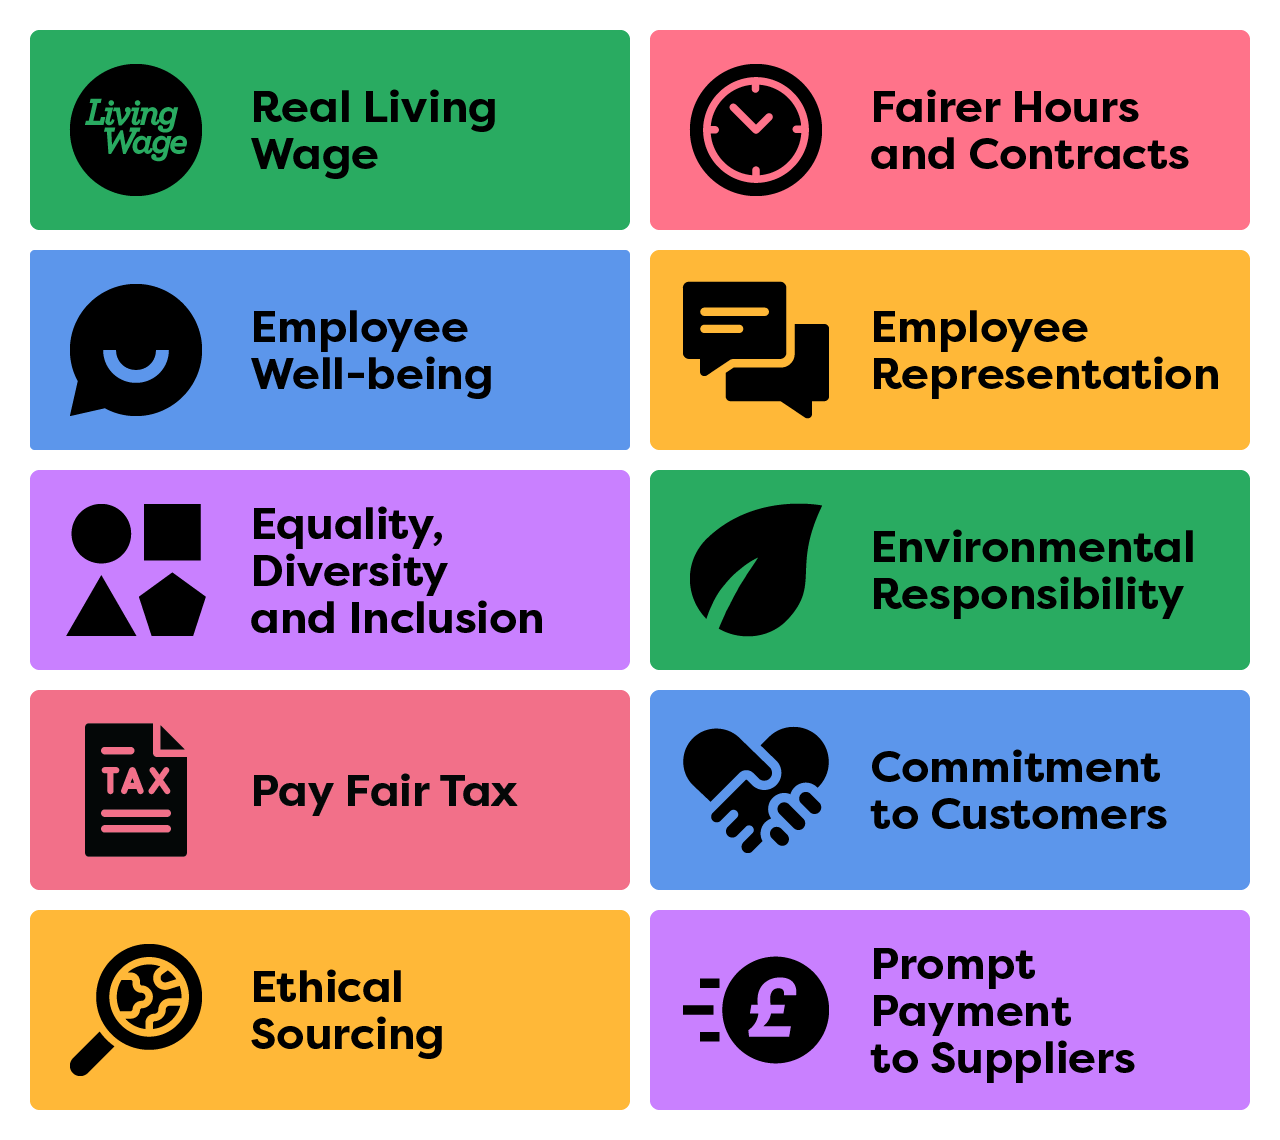 2 Fairer hours and contracts – what we expect